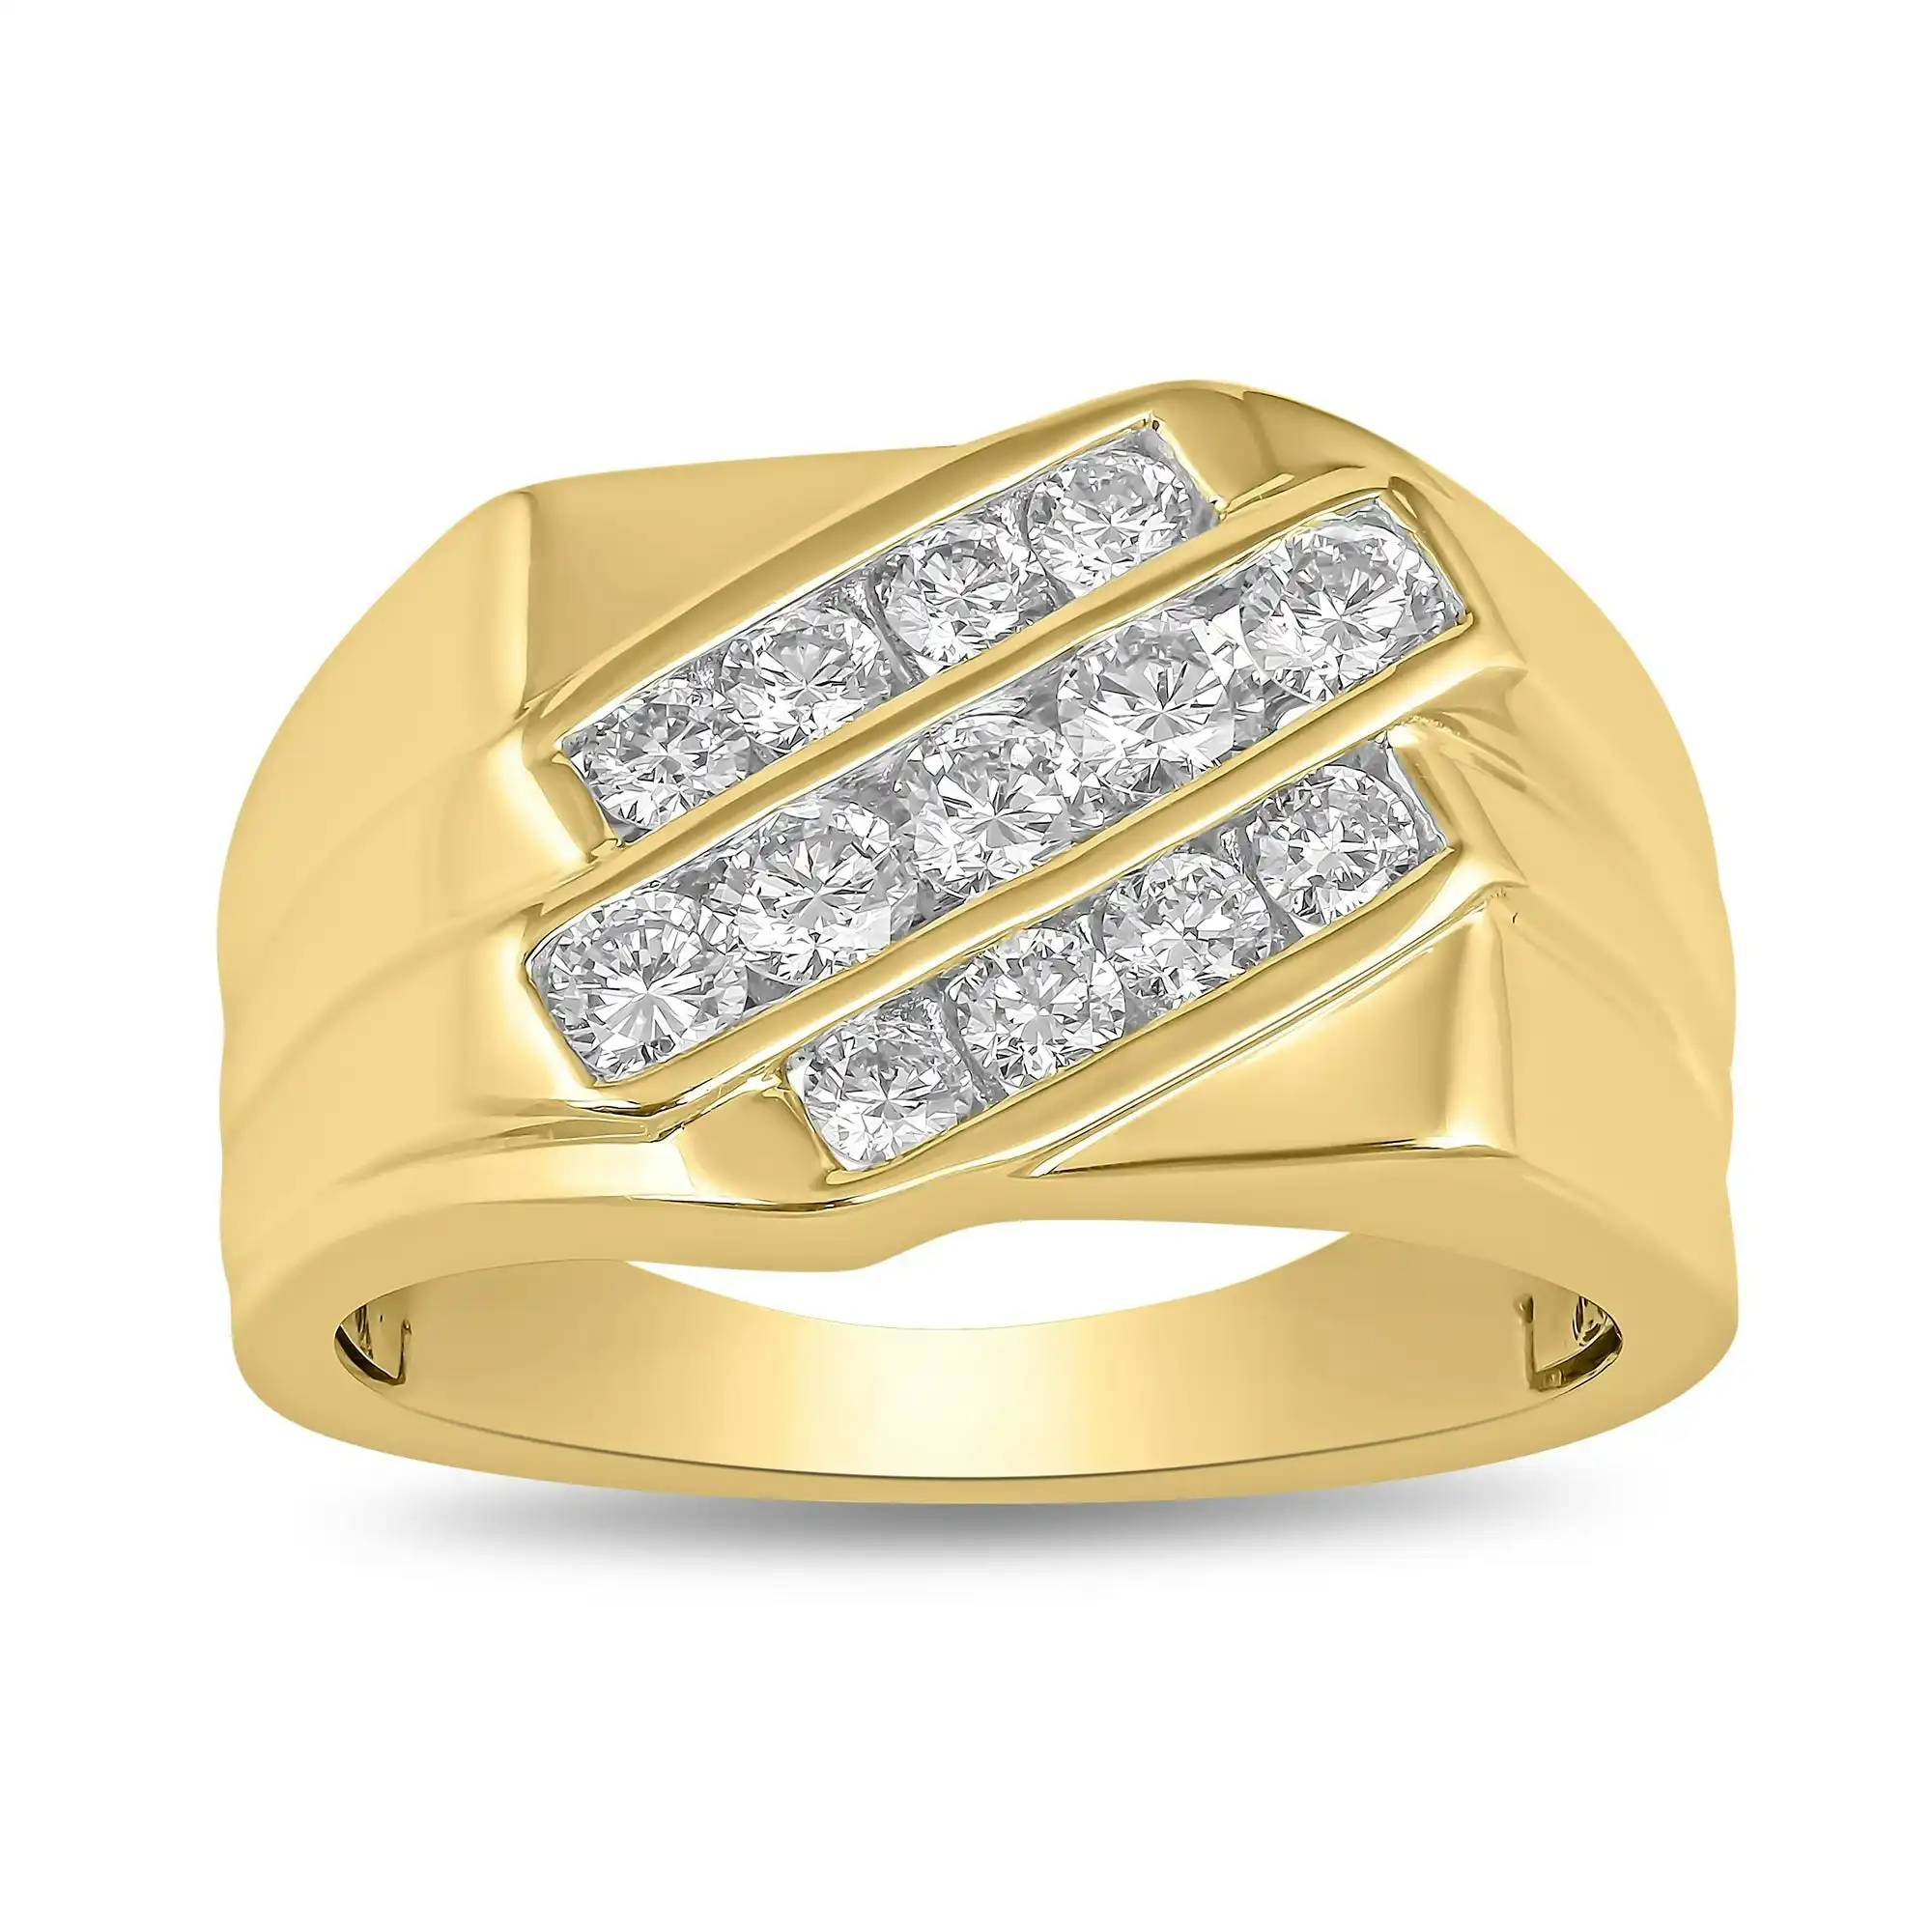 Meera Men's Ring with 1.00ct of Laboratory Grown Diamonds in 9ct Yellow Gold